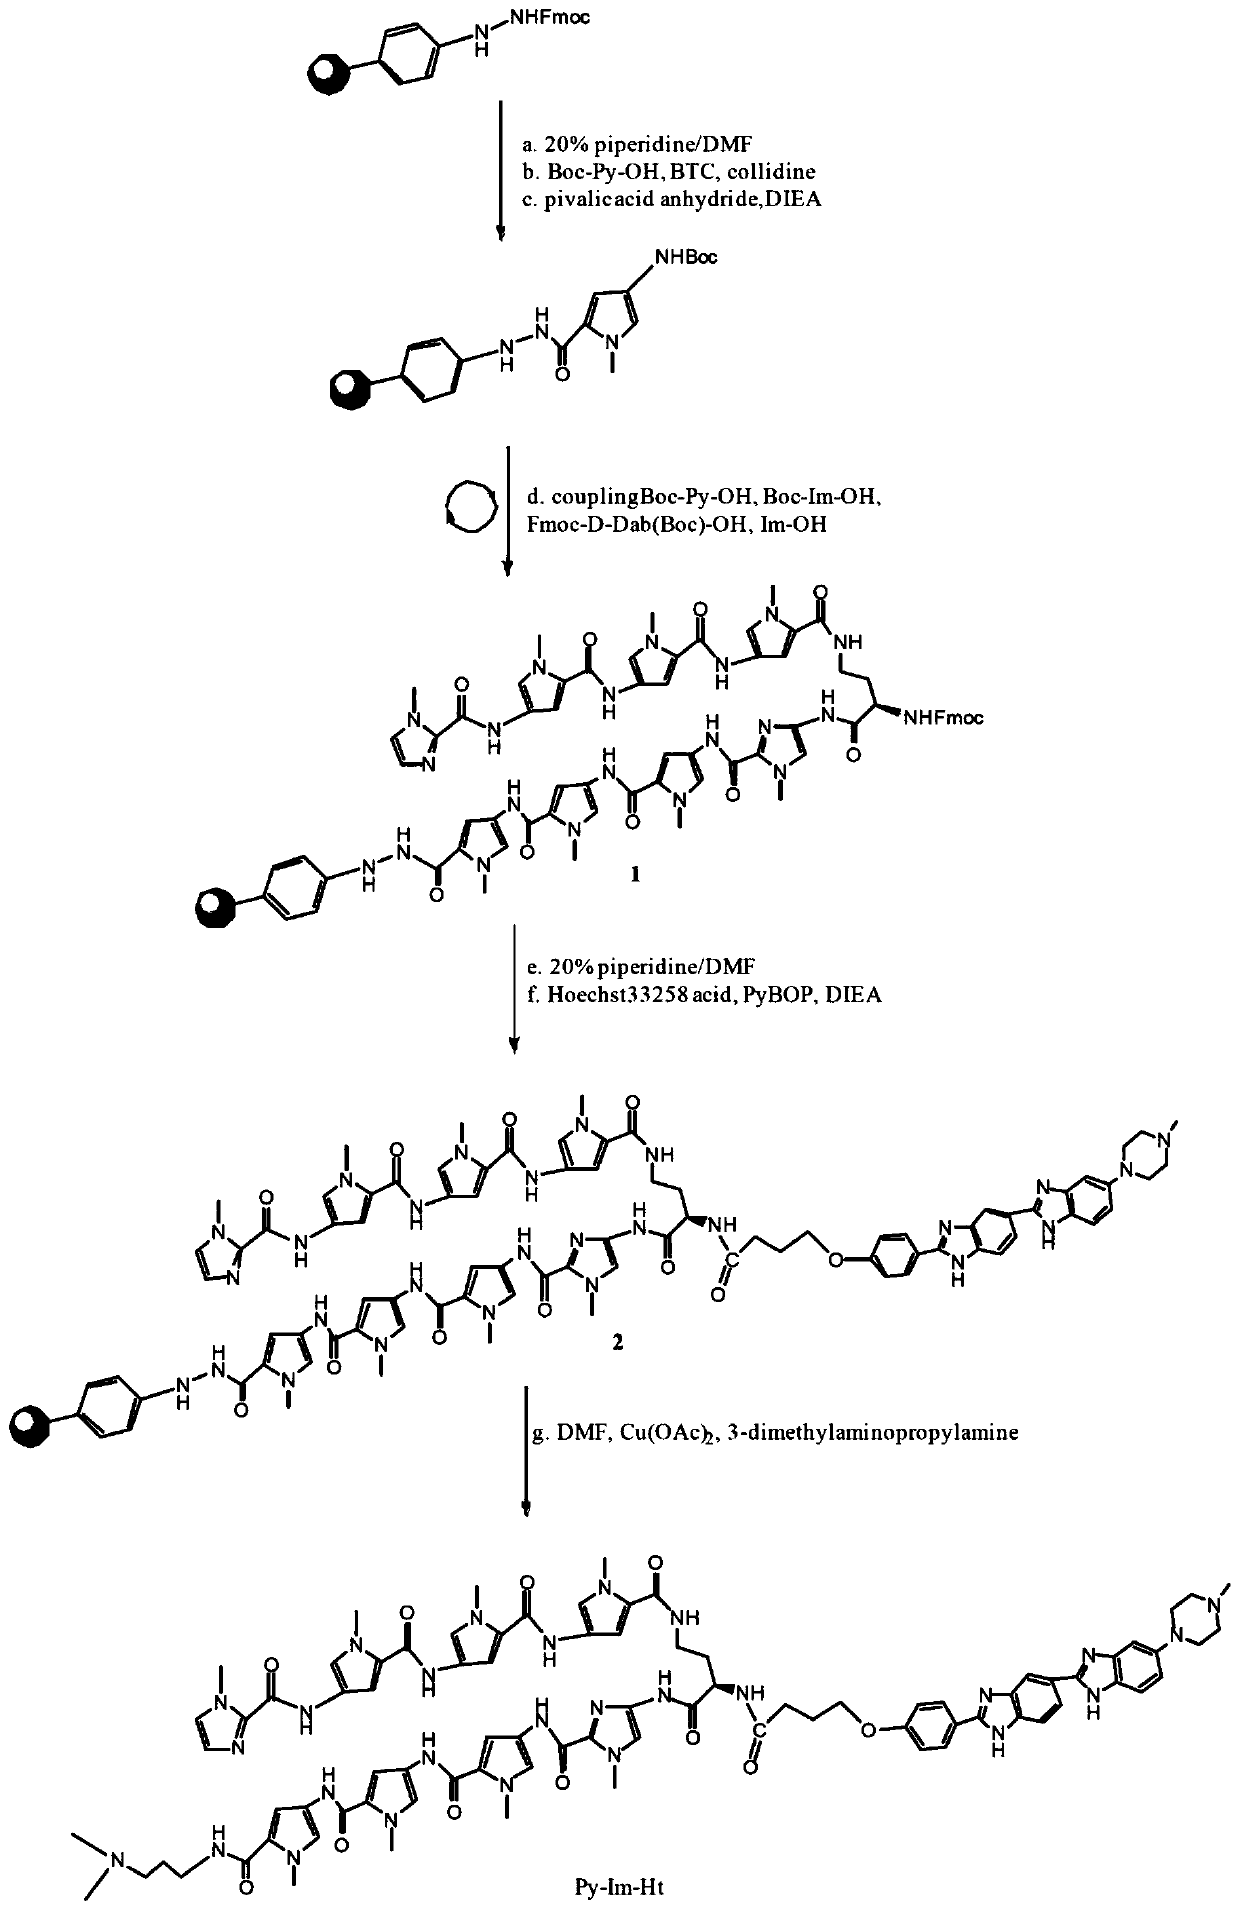 Aurora A protein inhibitor, preparation method thereof and medicament use